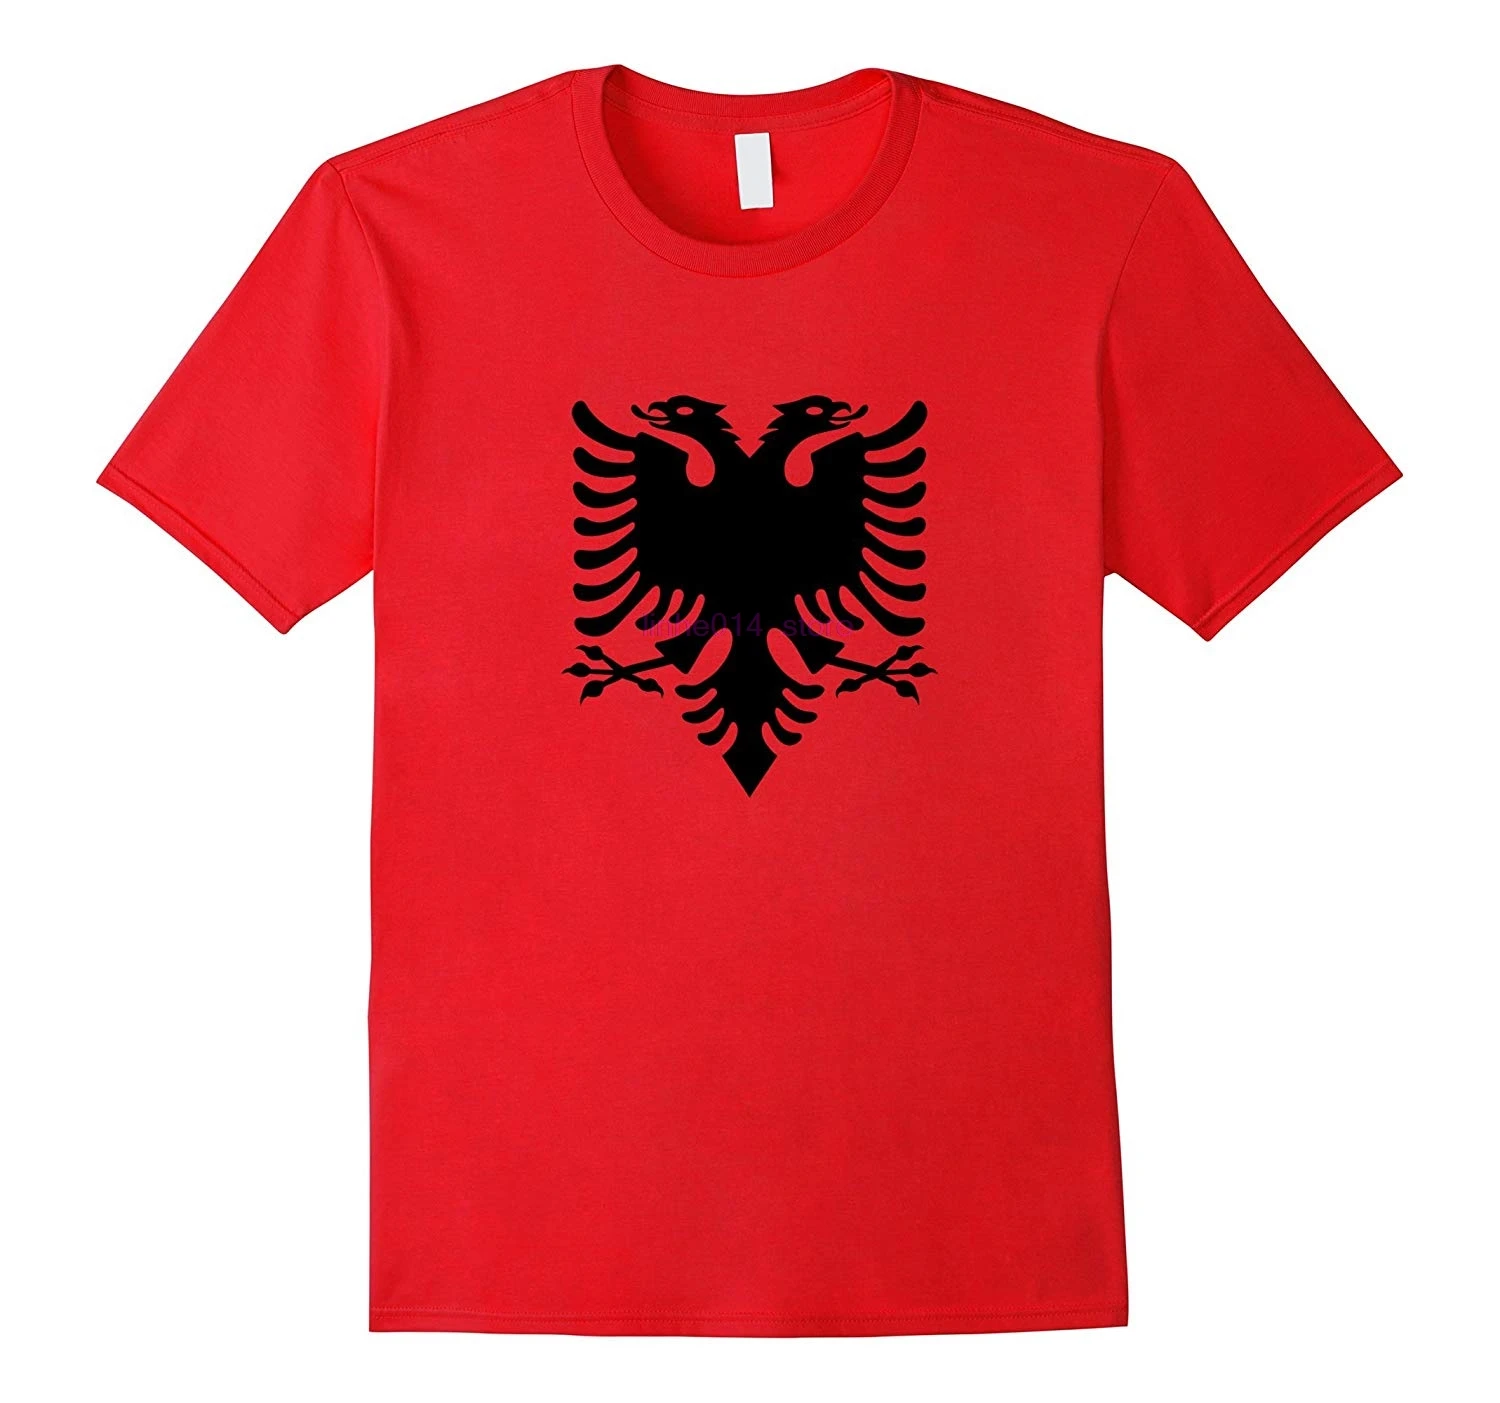 NEW ALBANIA FLAG ROYAL COAT OF ARMS  ALL OVER  PRINTED TOP T SHIRT